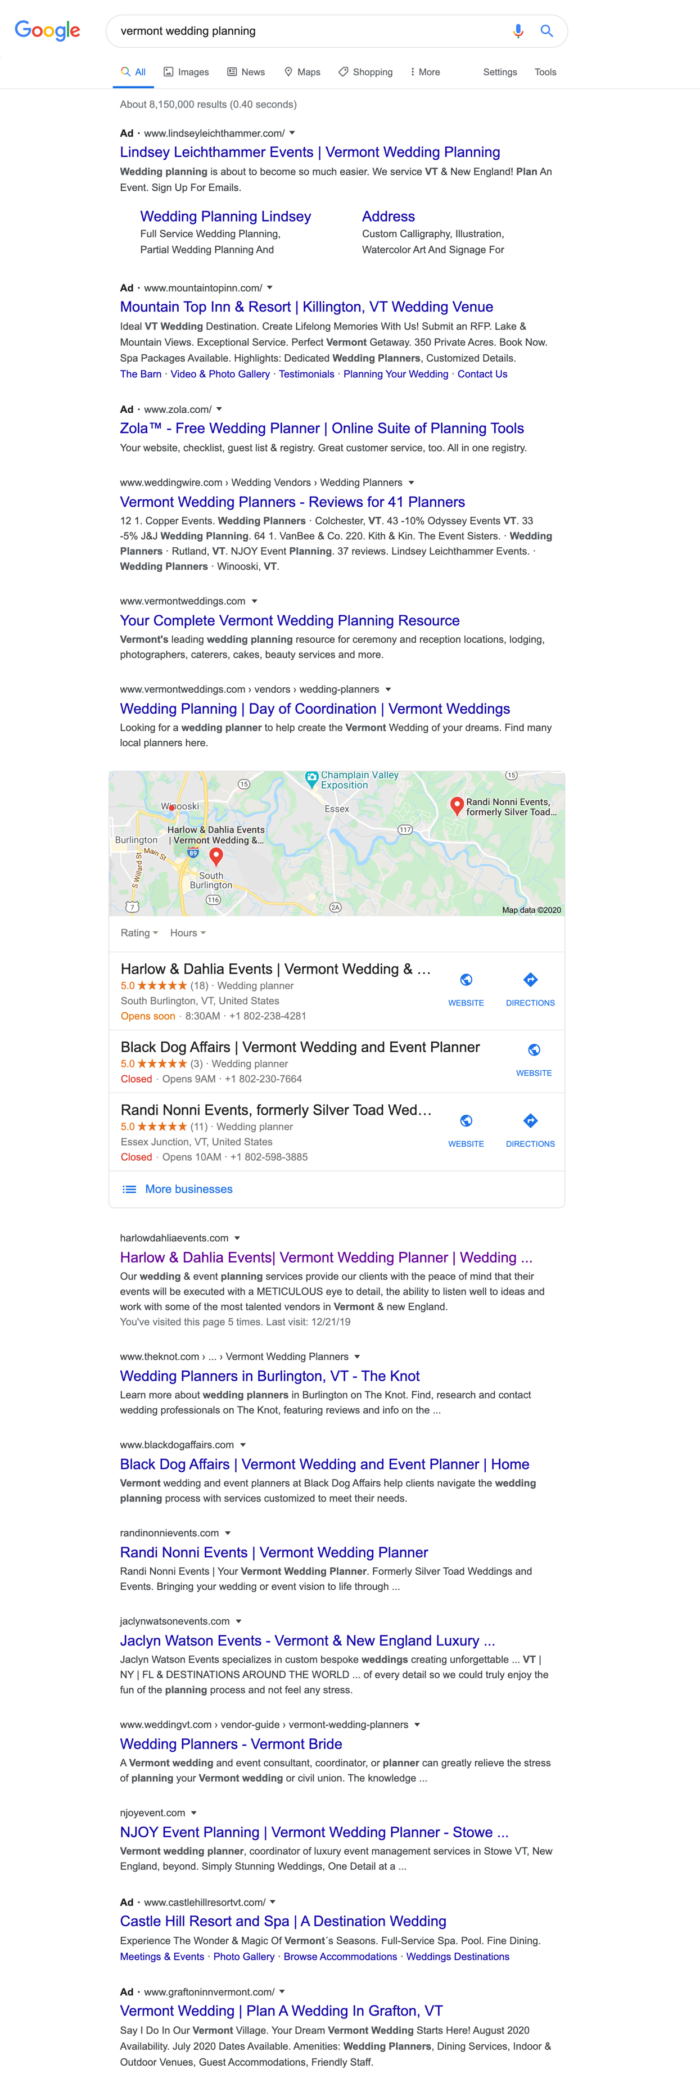 Event planner search results